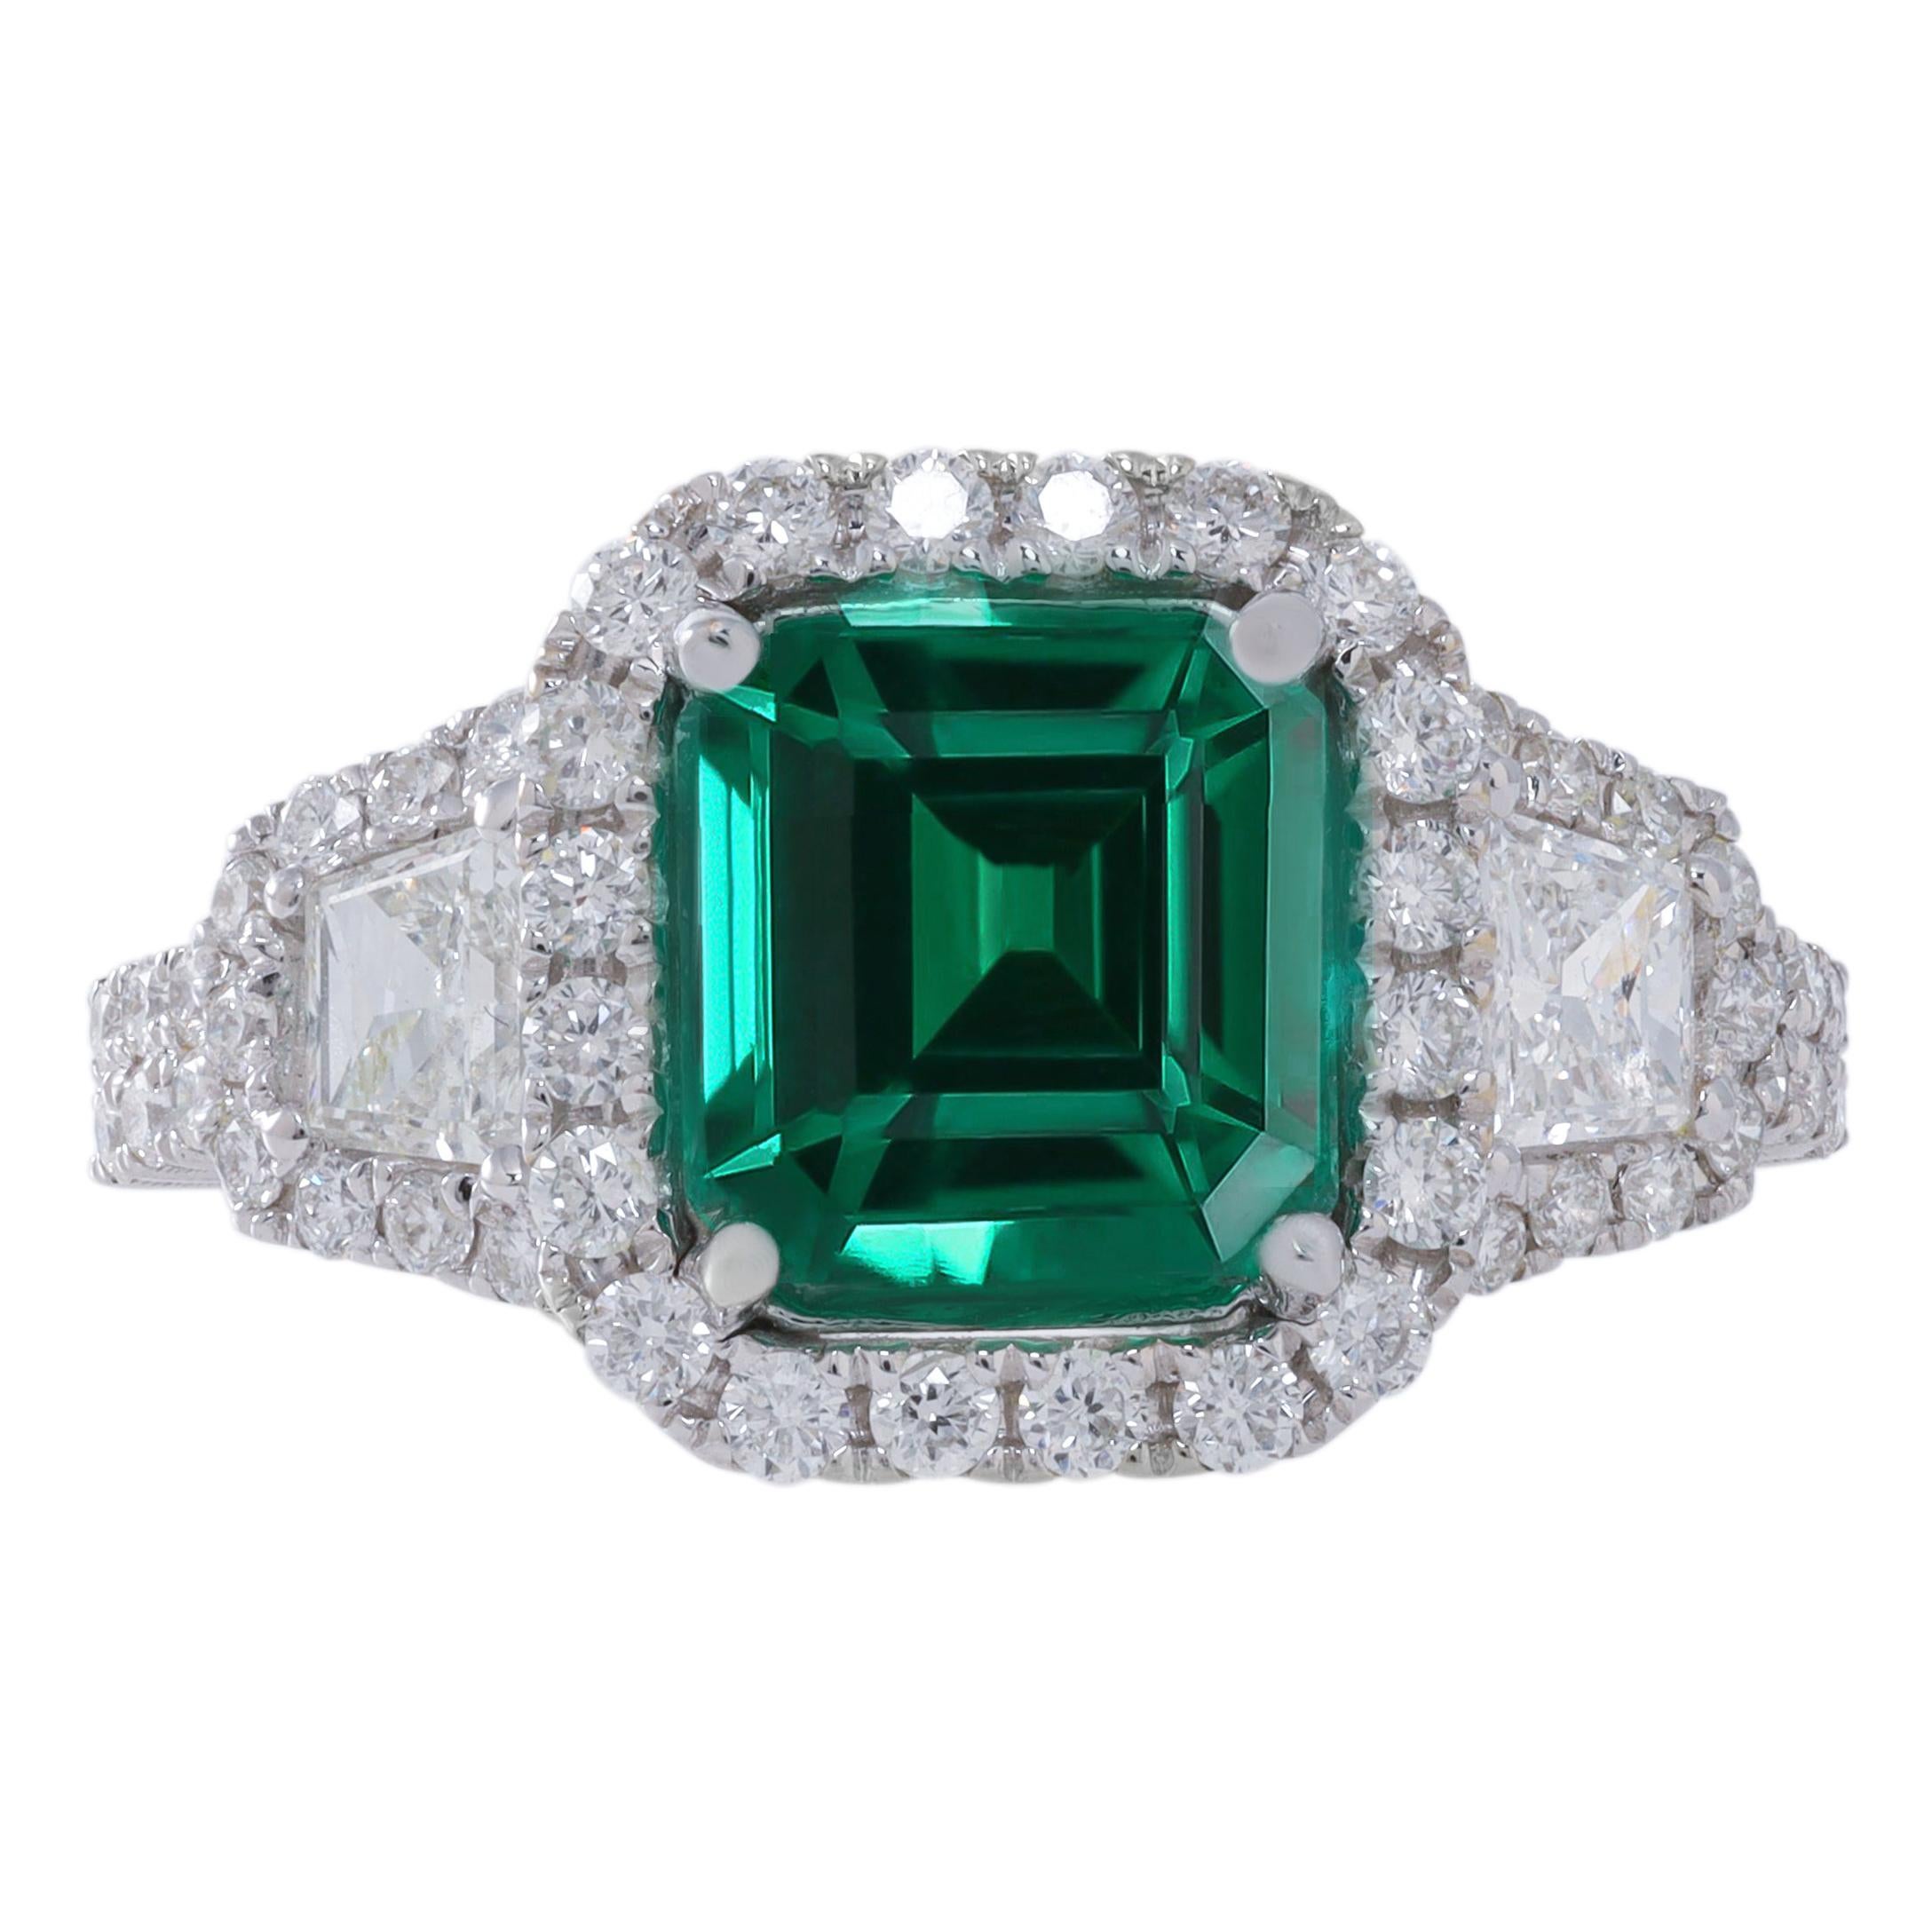 18k Wg Ring Diamond with 0.59ct Trp Diamond and Emerald 2.15ct For Sale